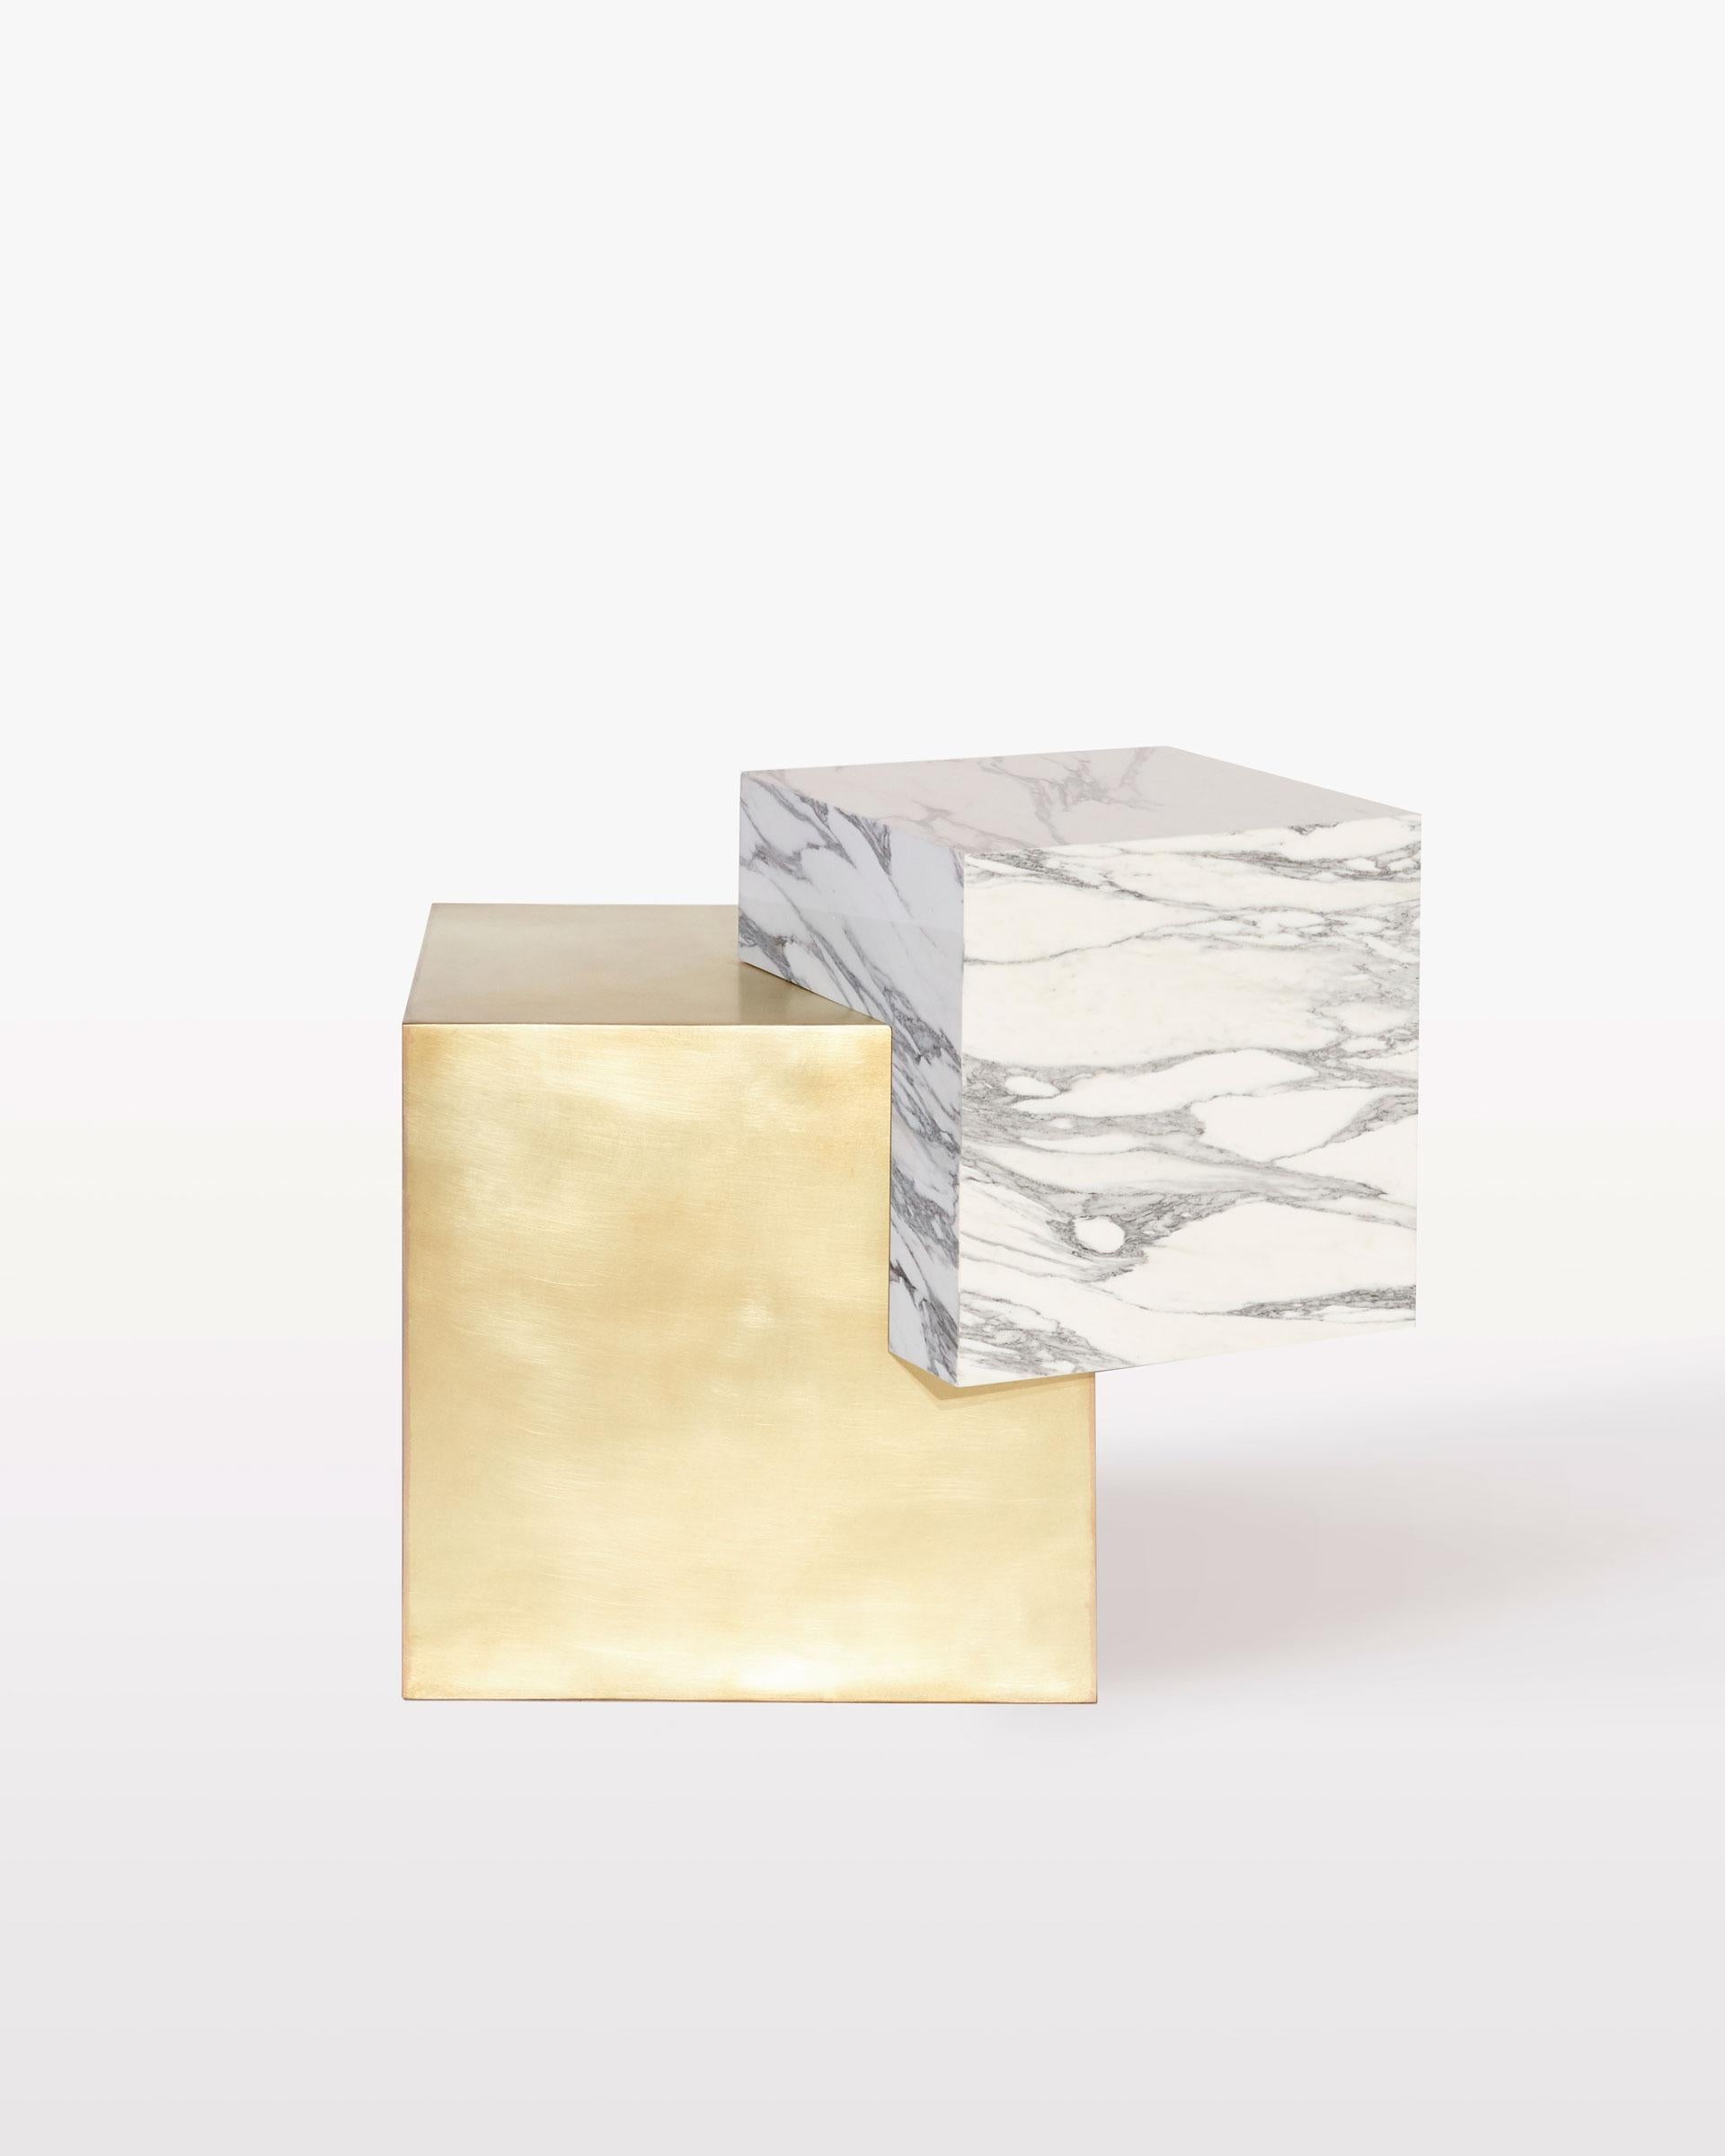 The coexist askew side table is an exploration of balance, material, and harmony. The materials consist of a brushed brass cube base and a marble cube top.

The table features a marble cube balanced at an unexpected angle on the brass cube base.